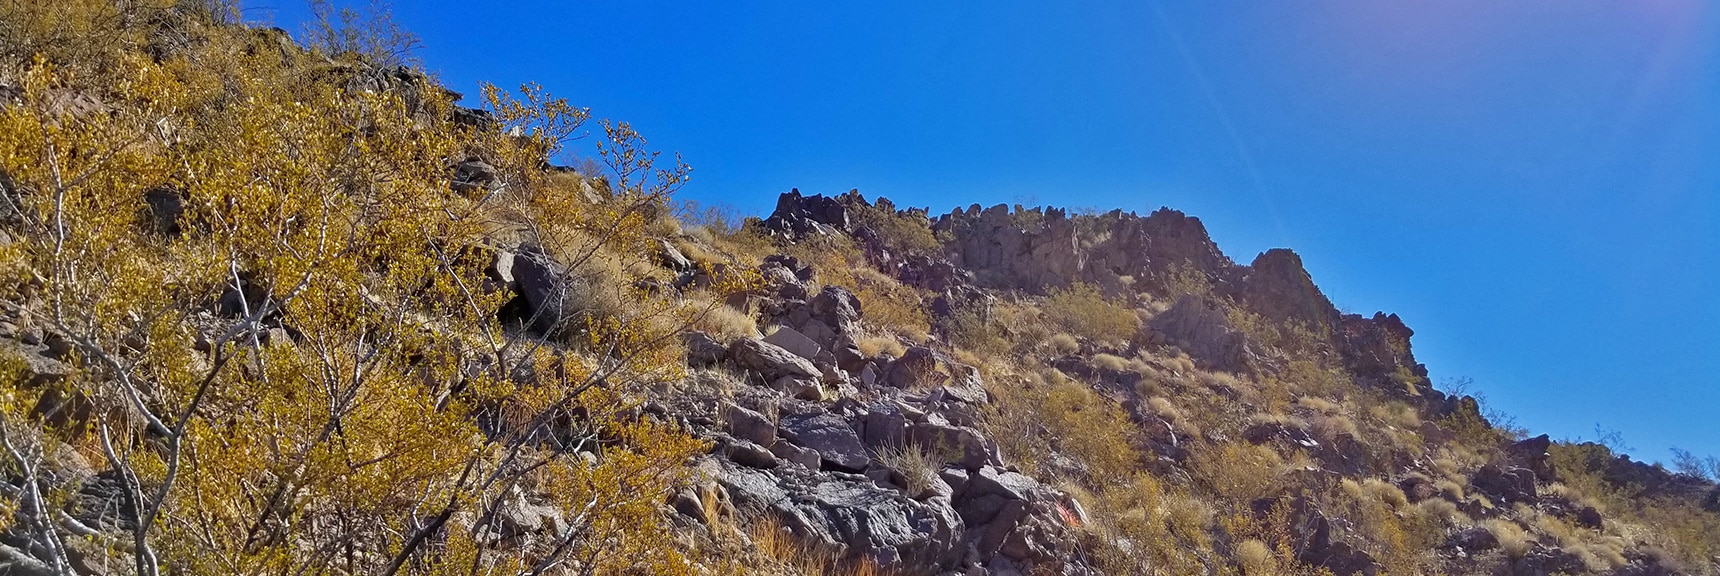 Nearing the First Summit in the High Points Around Hamblin Mt. | Hamblin Mountain, Lake Mead National Conservation Area, Nevada